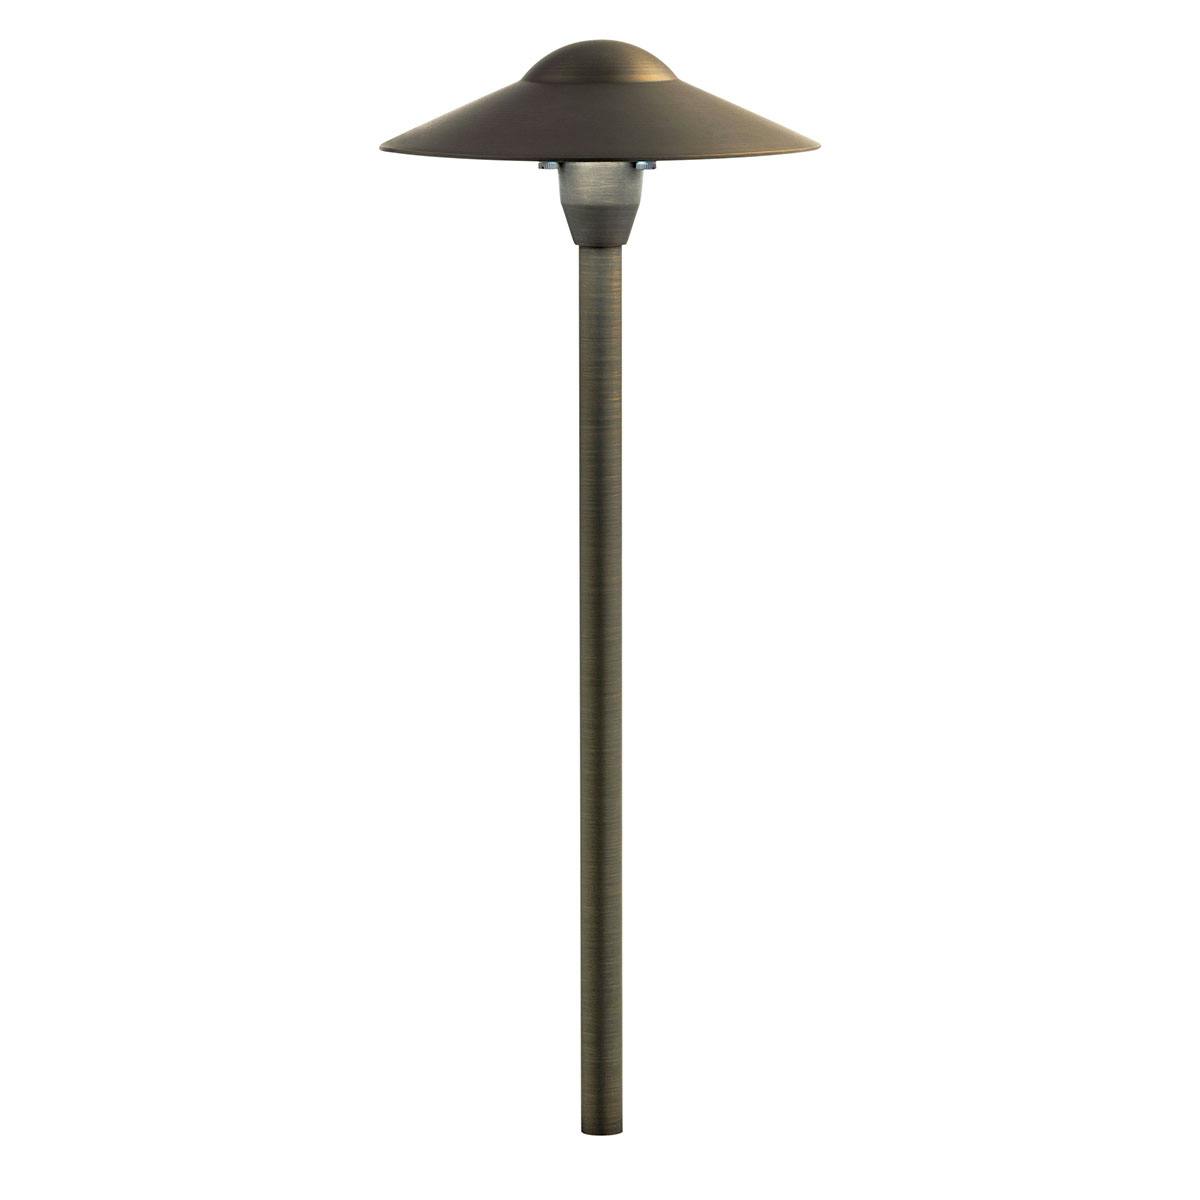 8" Dome Path Light Centennial Brass on a white background